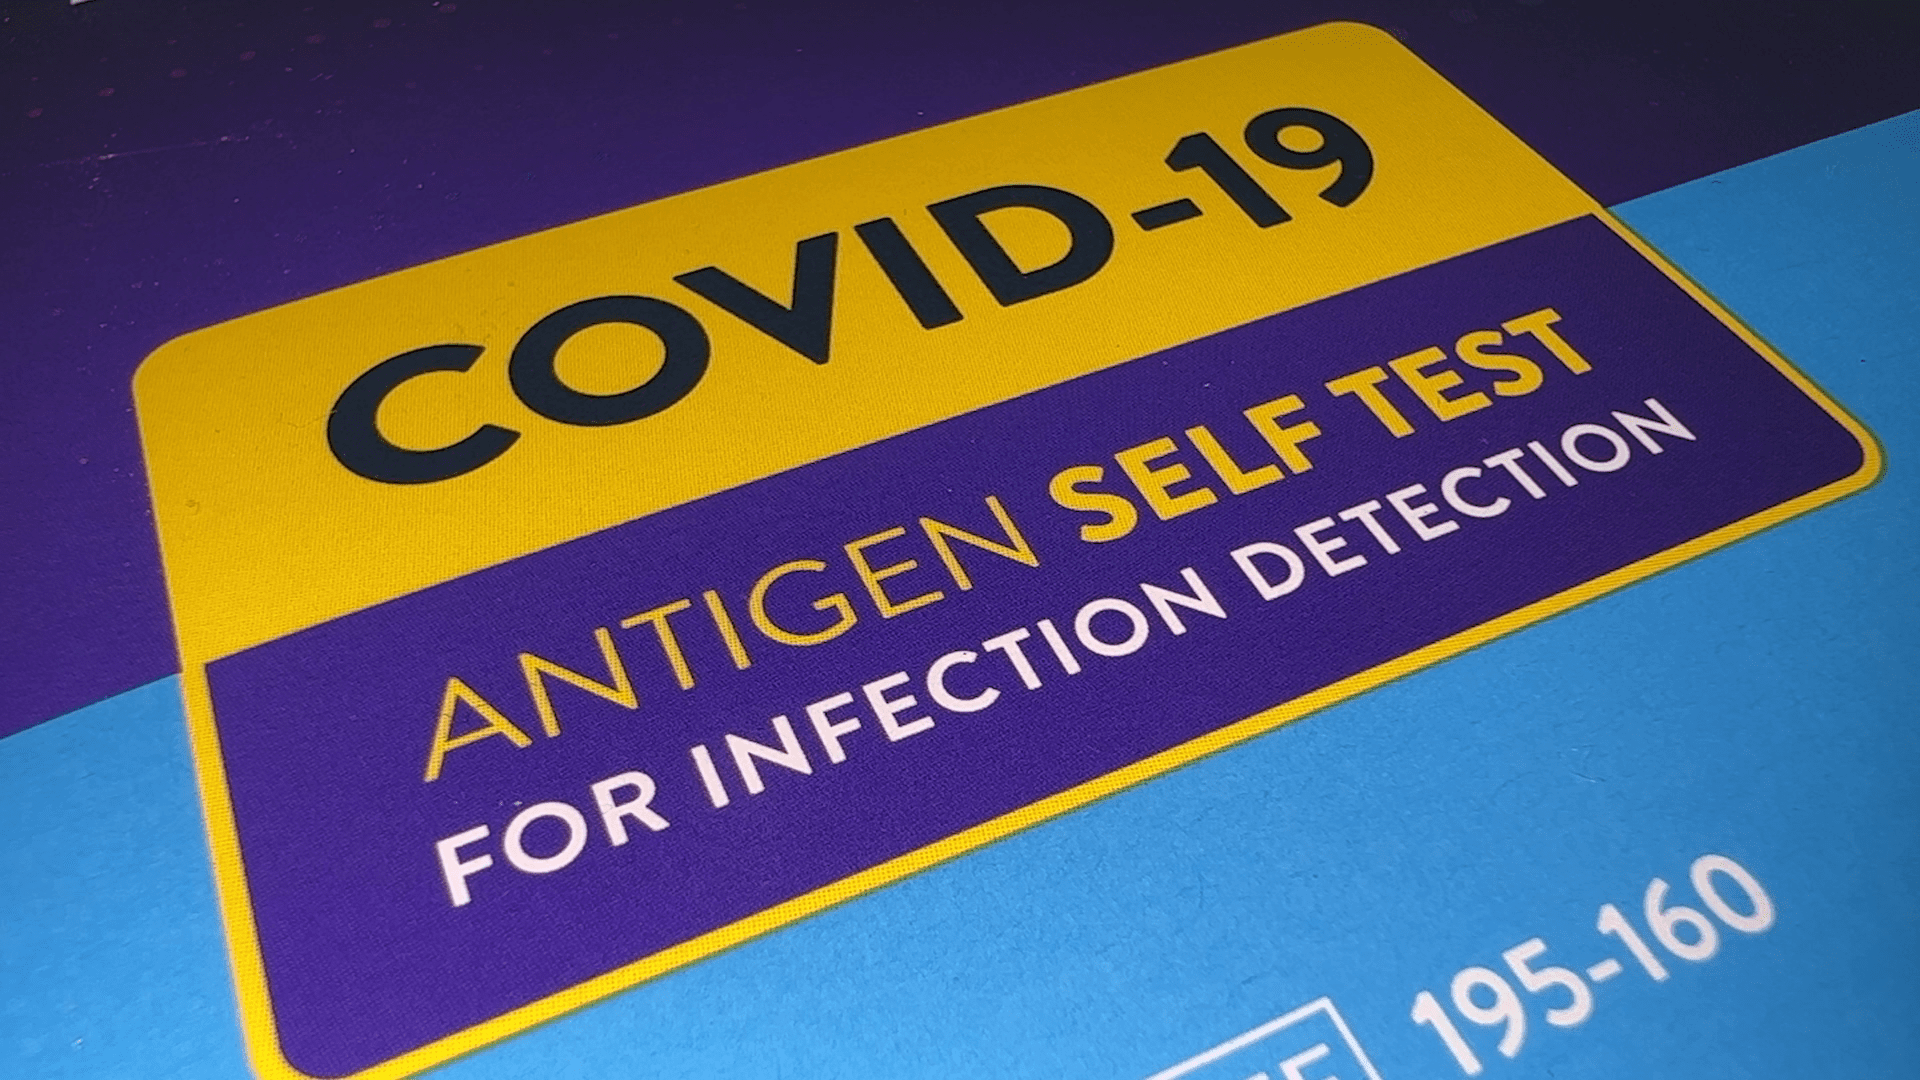 Full screen graphic sign stating COVID 19 antigen self test for infection detection.